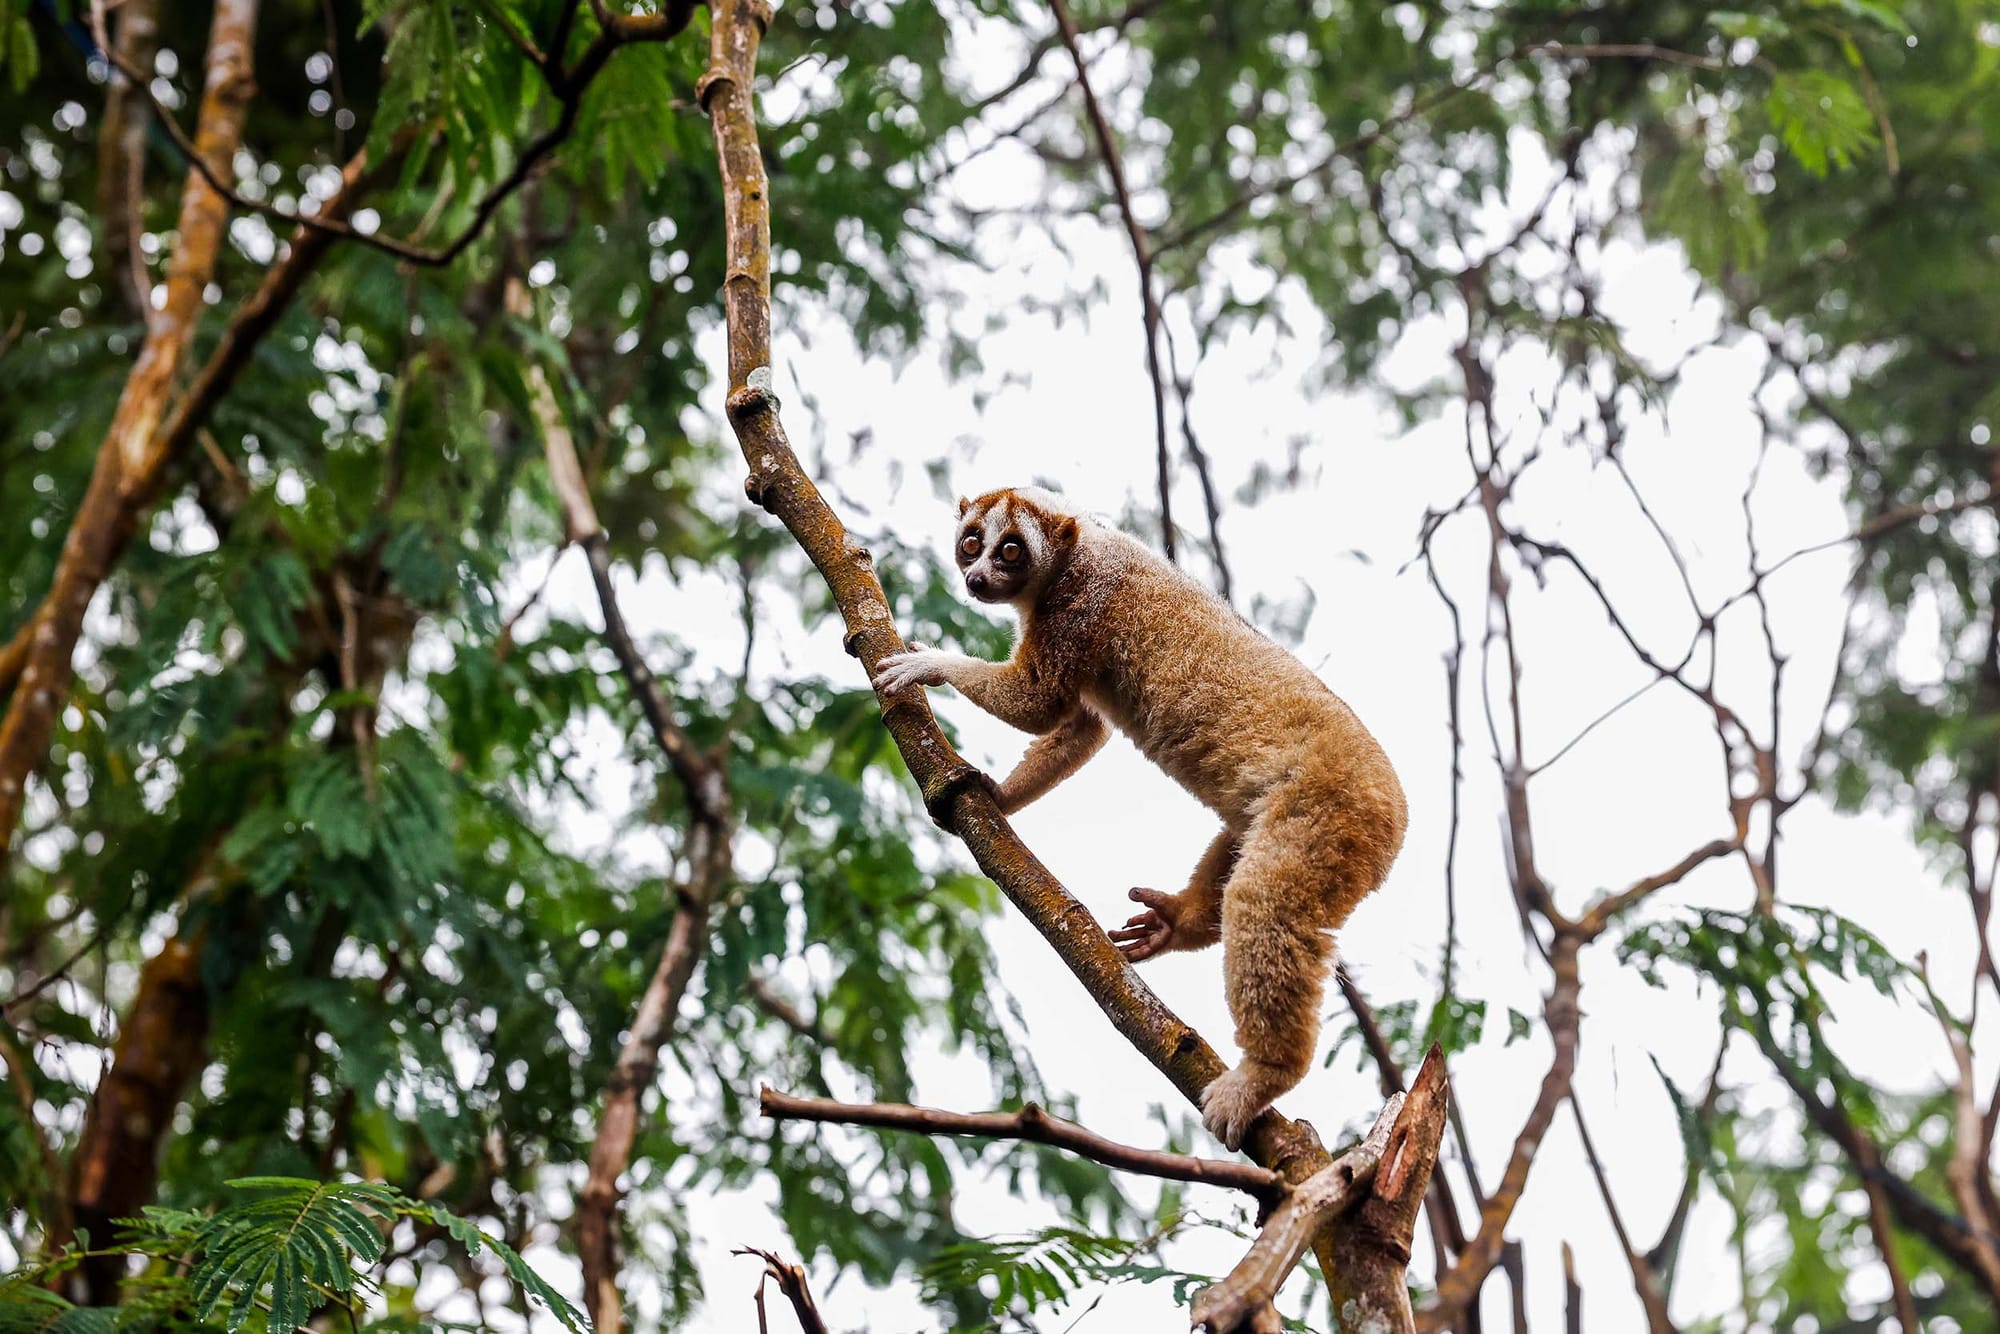 A Javan slow loris perched in a tree, surrounded by leaves and branches